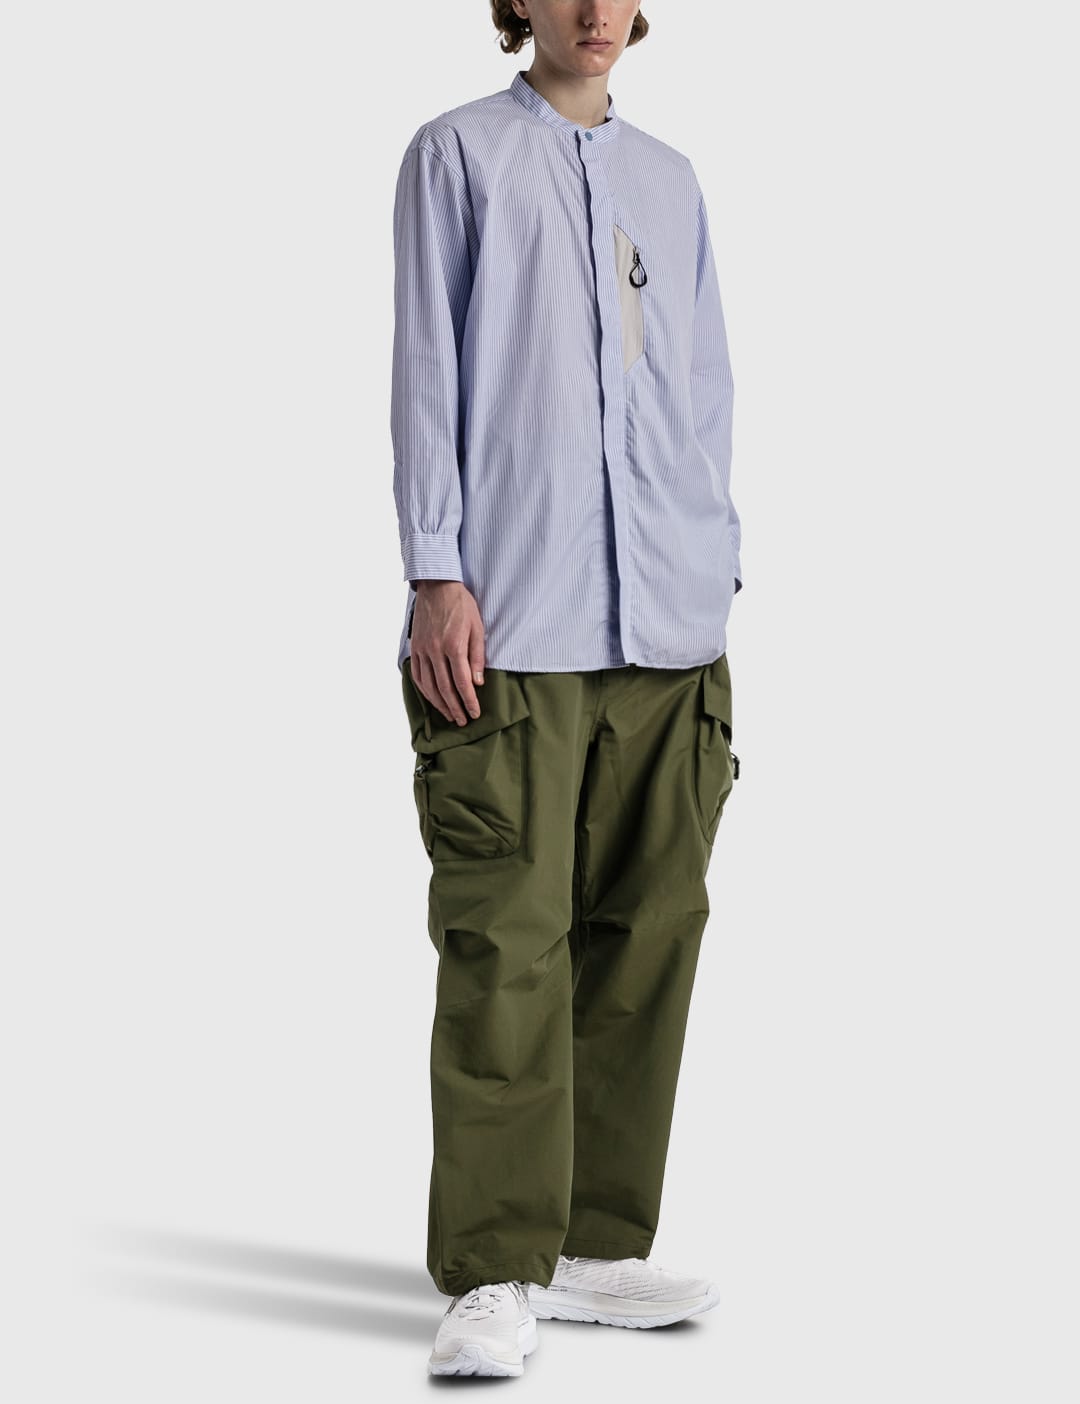 Comfy Outdoor Garment - PF SHIRTS | HBX - Globally Curated Fashion 